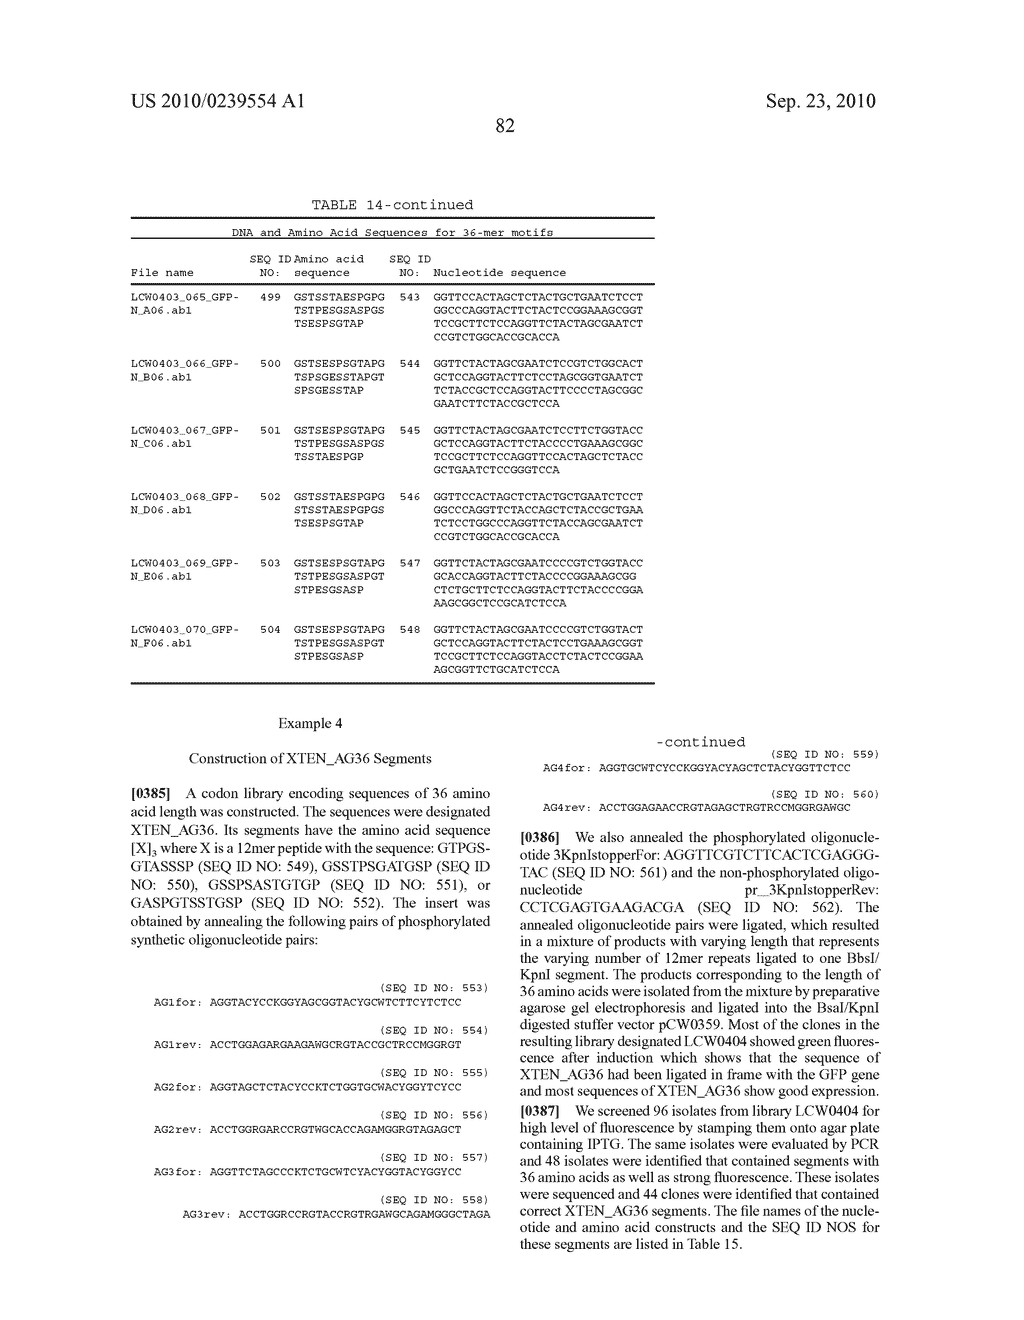 EXTENDED RECOMBINANT POLYPEPTIDES AND COMPOSITIONS COMPRISING SAME - diagram, schematic, and image 131